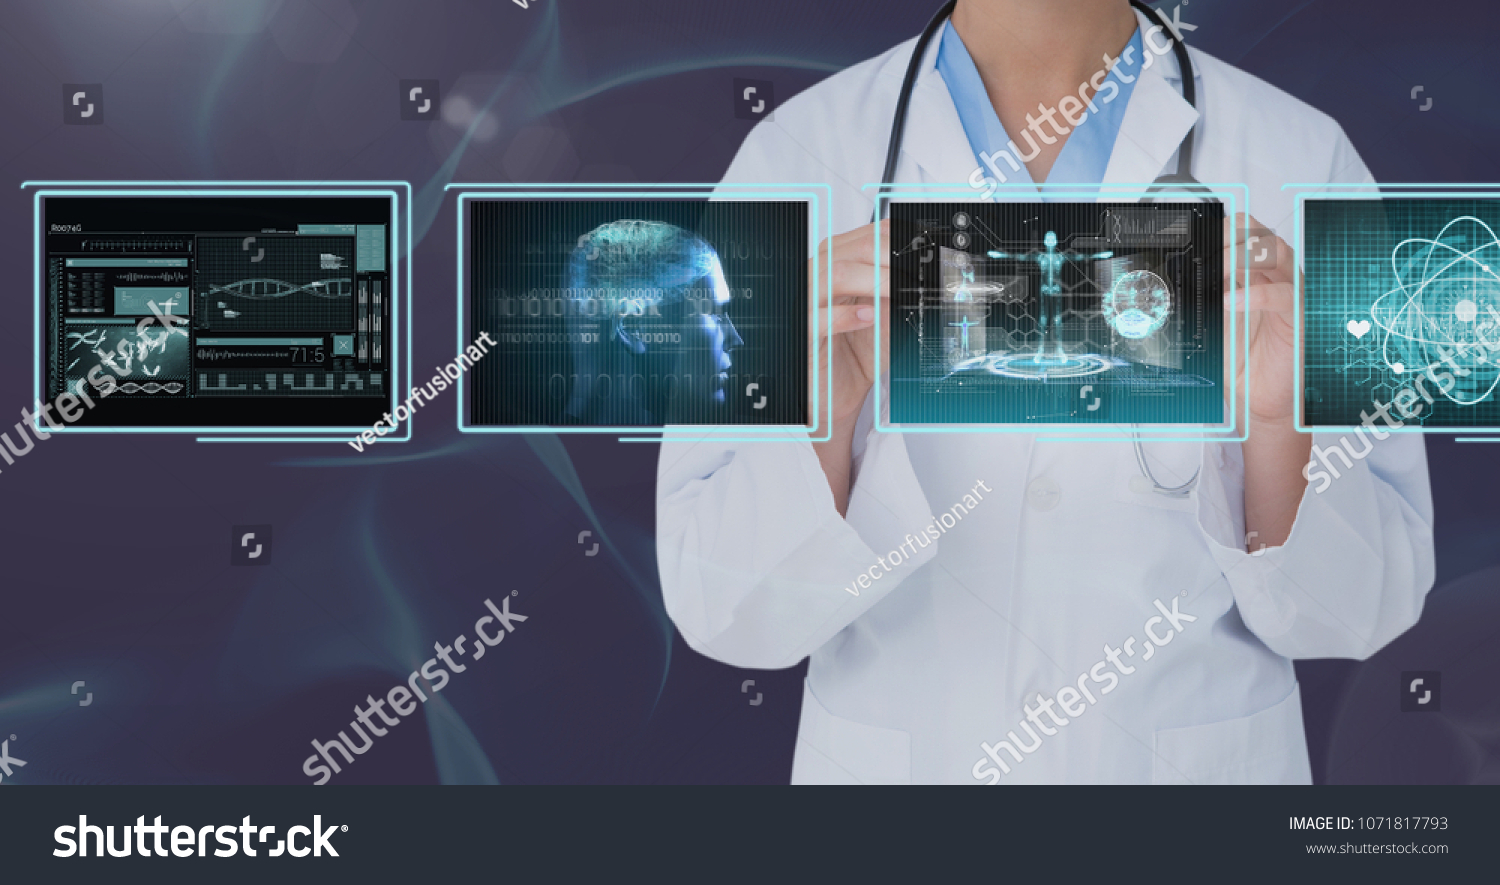 Woman doctor interacting with medical interfaces against purple background #1071817793